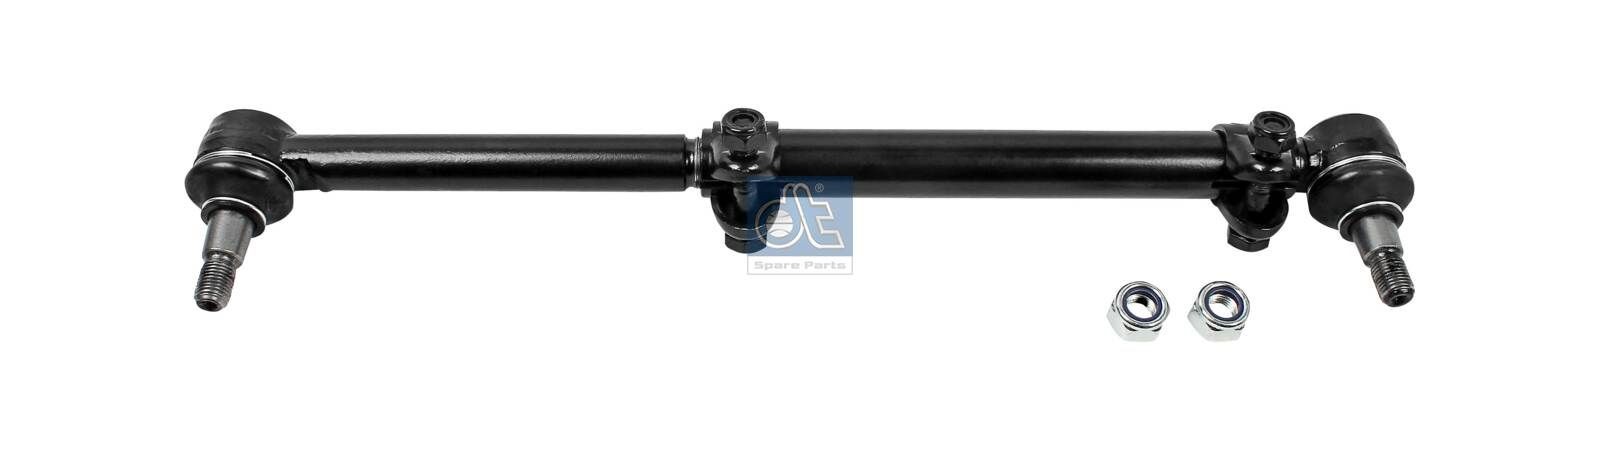 DT Spare Parts 4.67414 Rod Assembly 601 460 1505